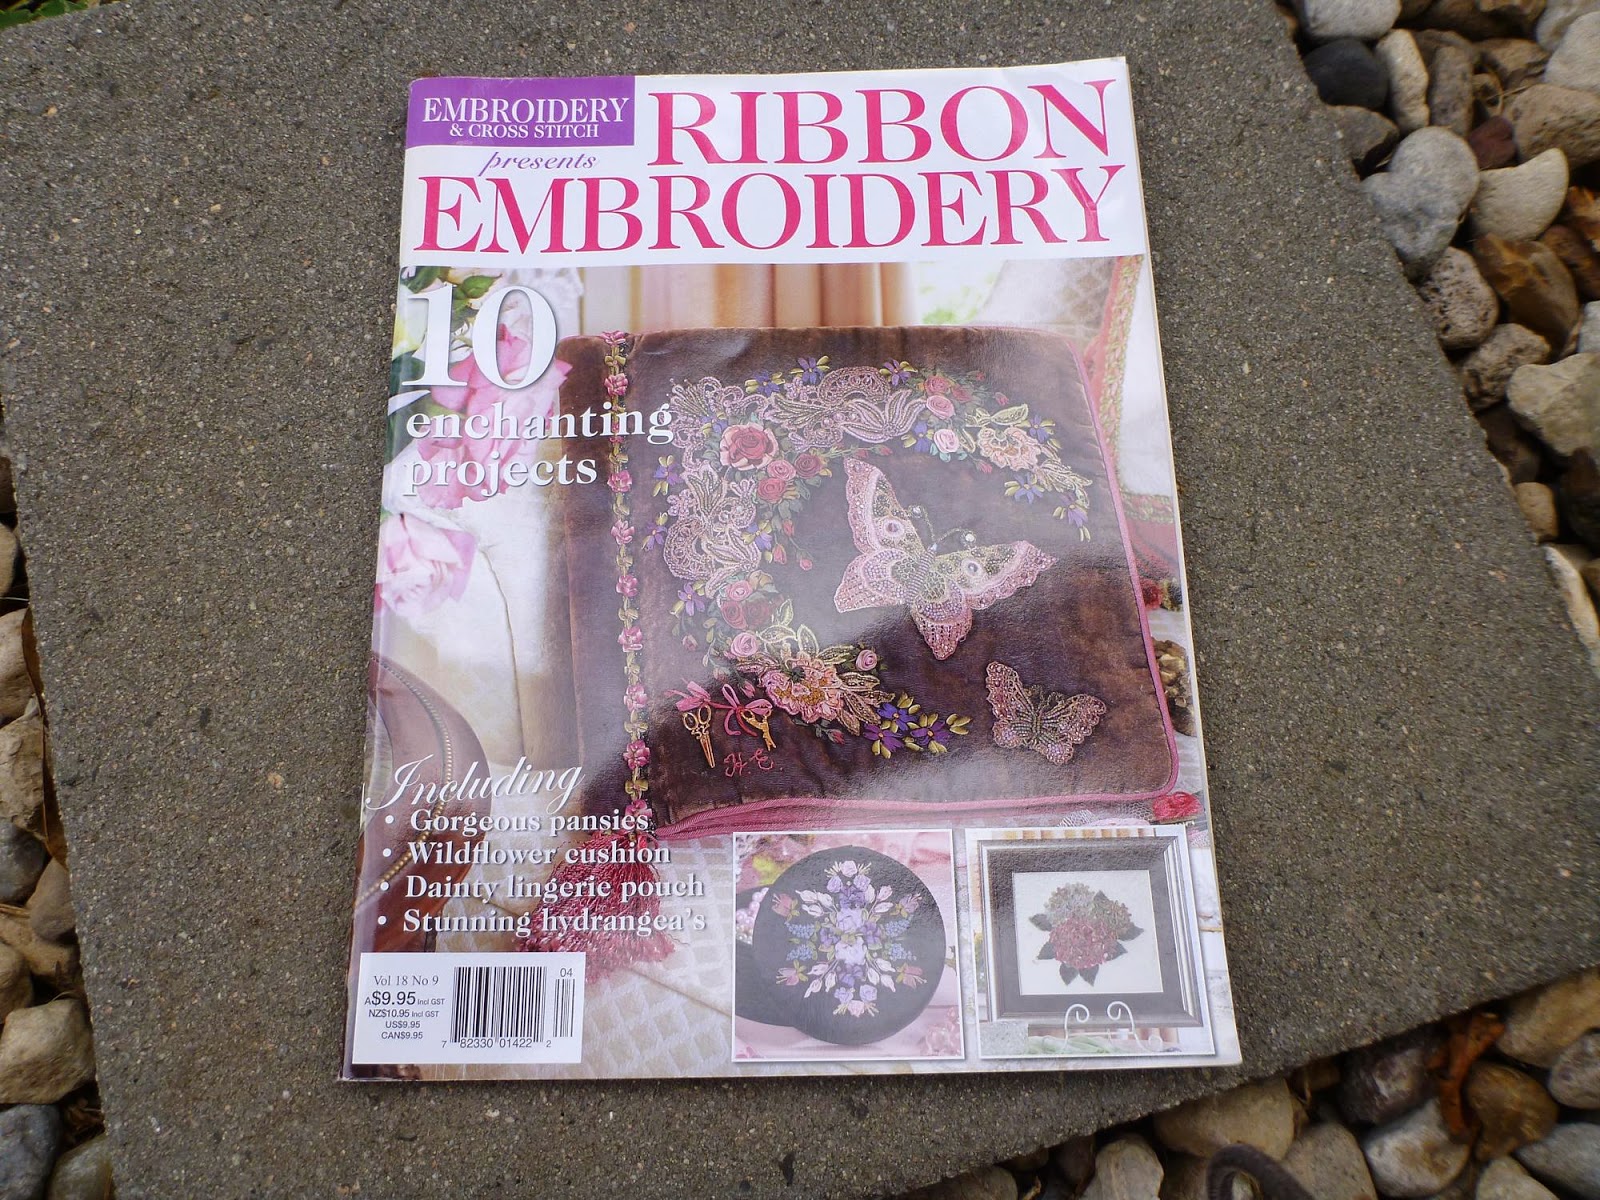 What is Ribbon Embroidery?